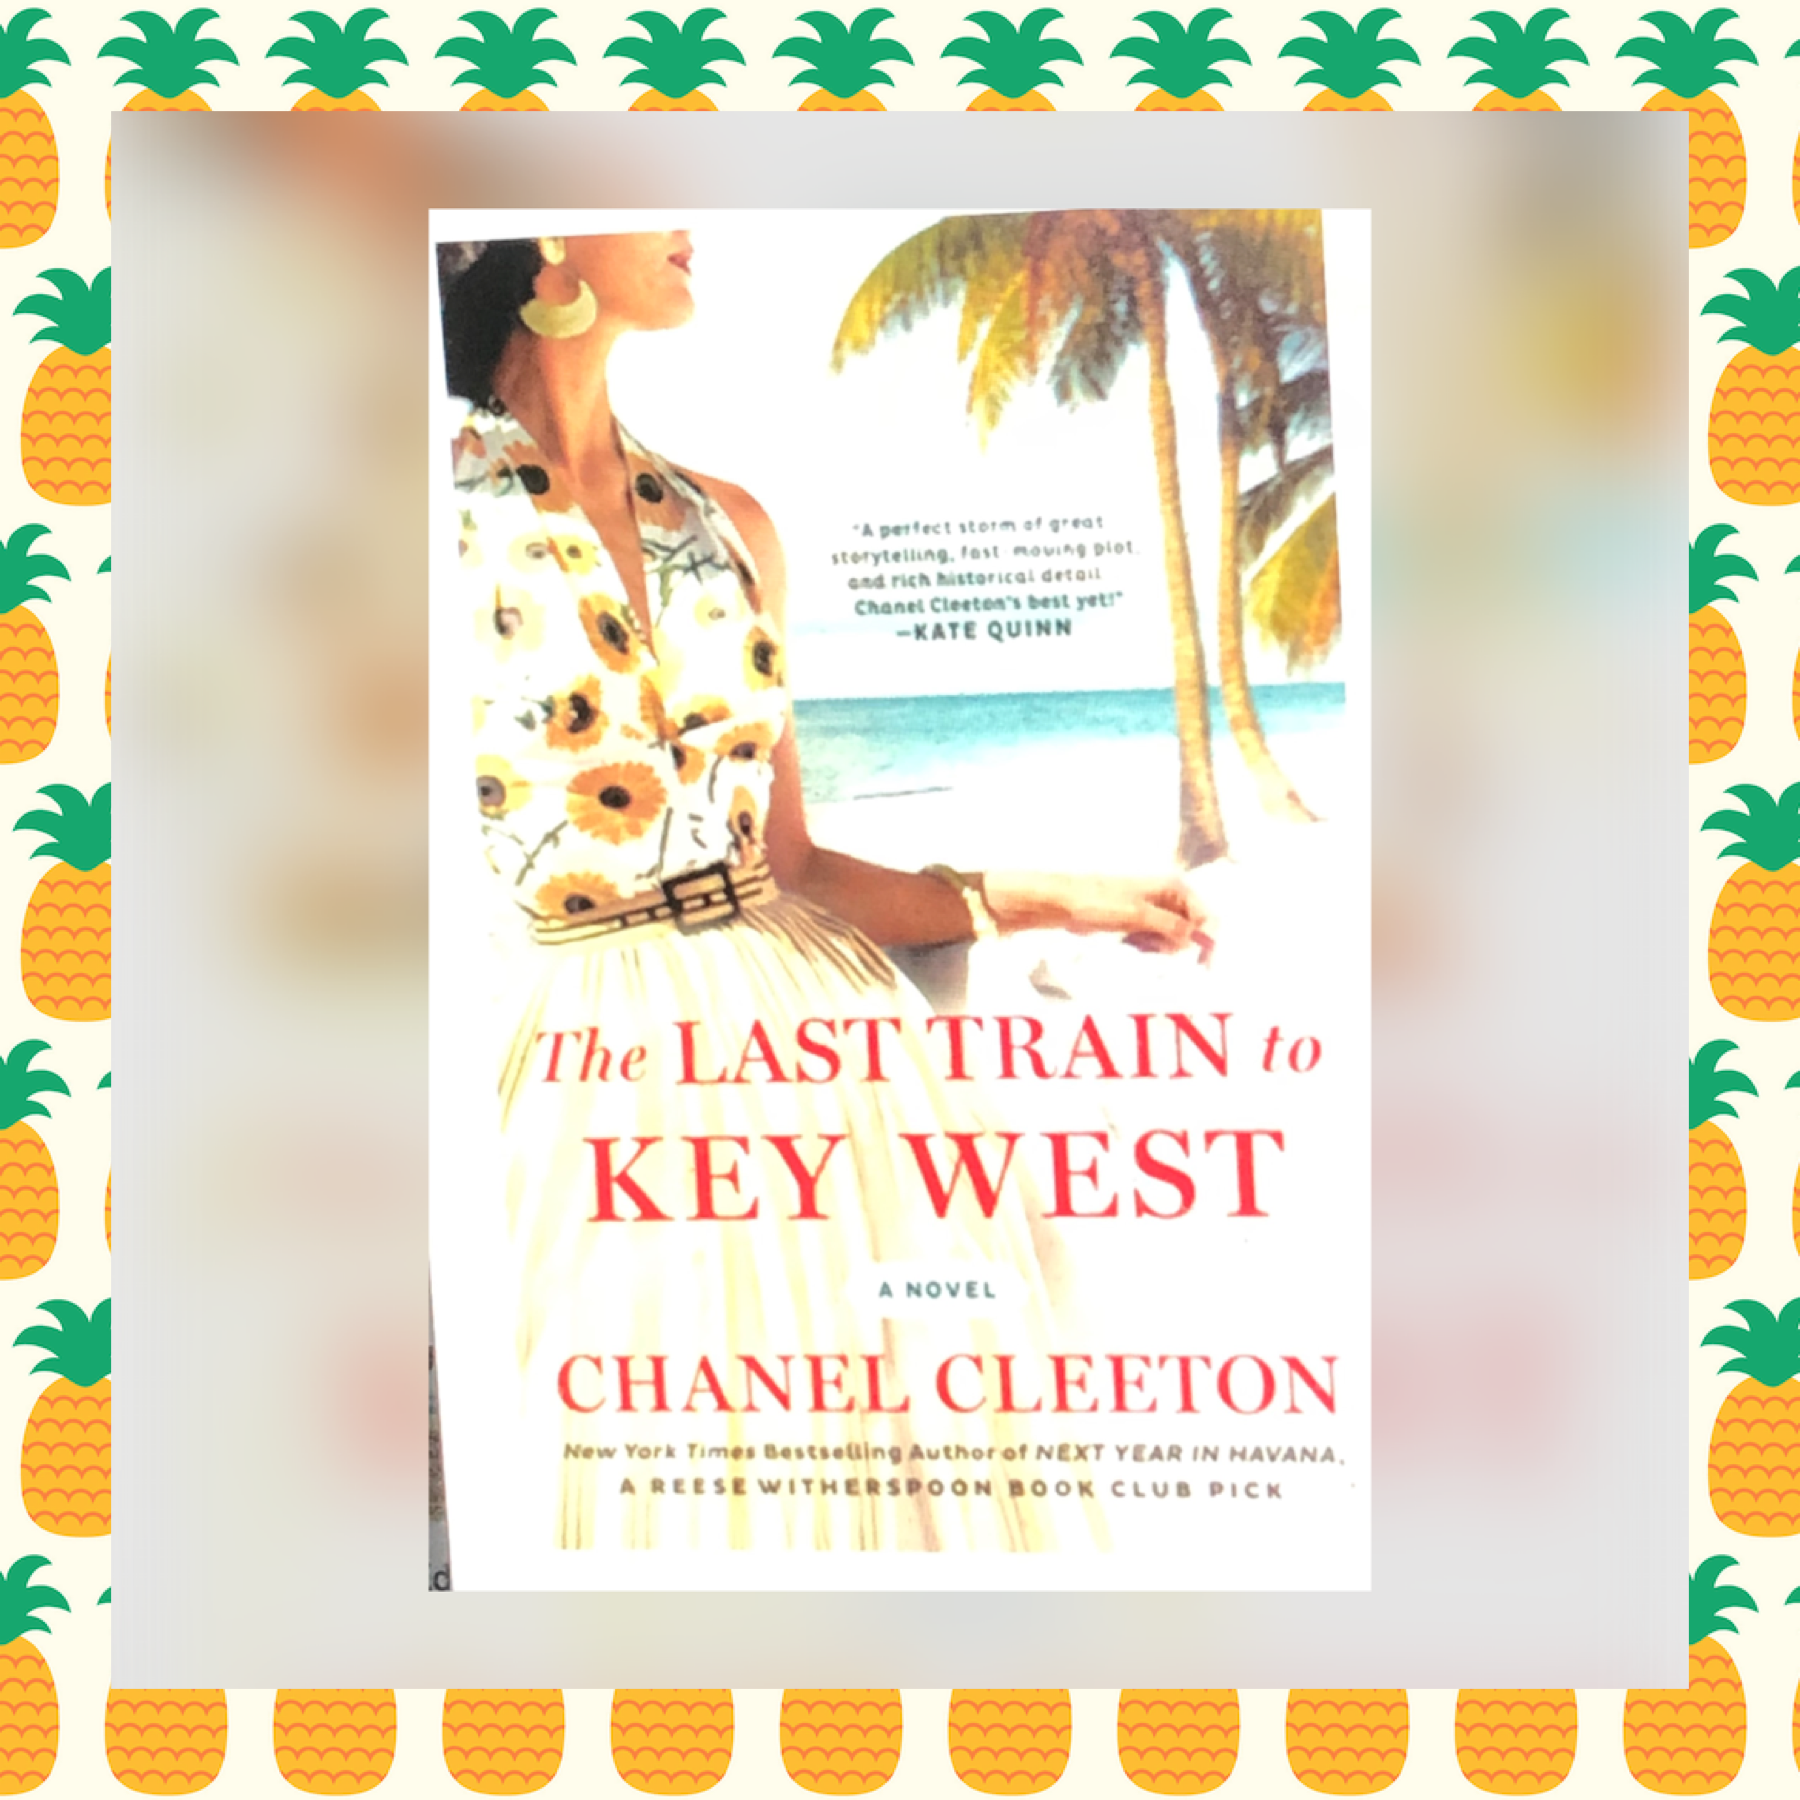 Linda's Book Obsession Reviews “The Last Train to Key West” by